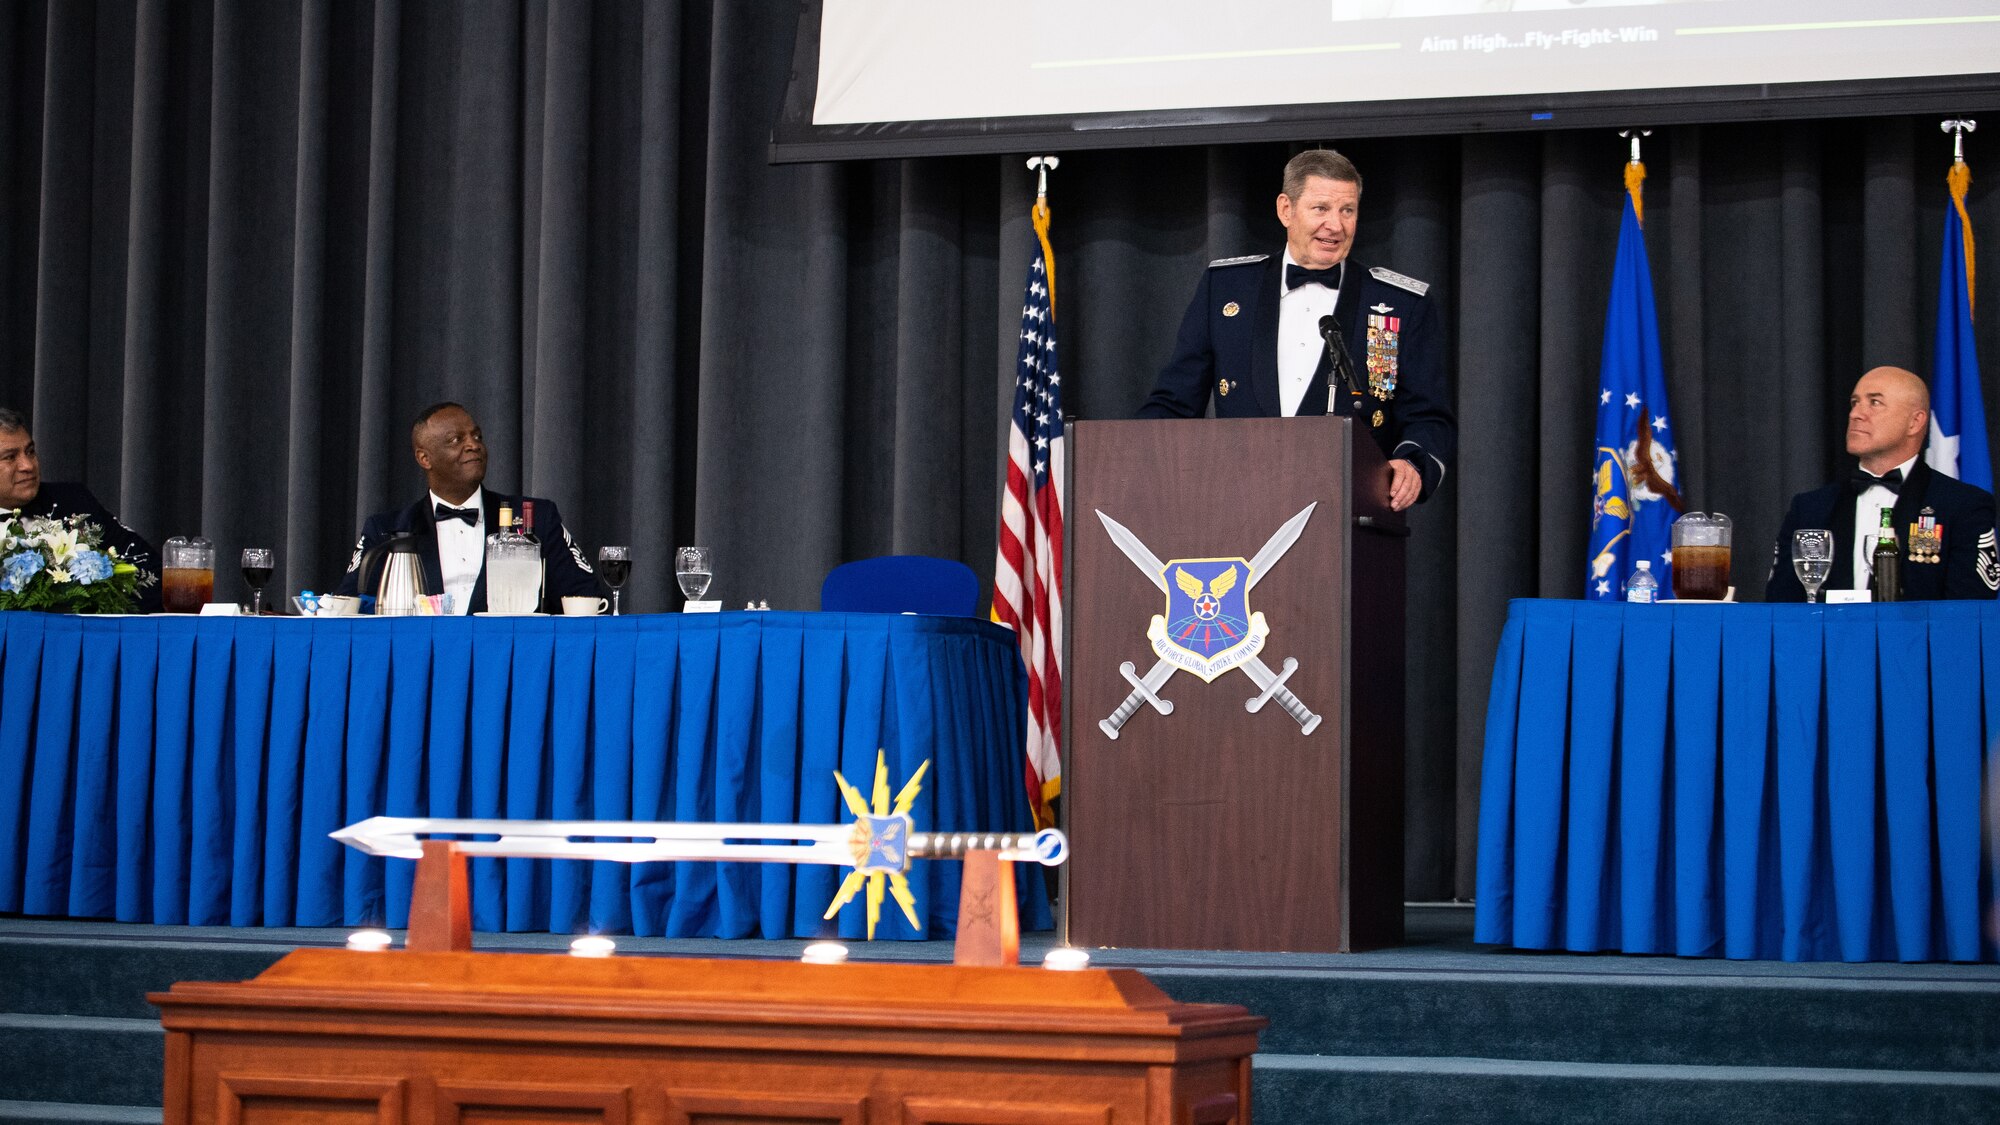 Retired Gen. Robin Rand, center, former Air Force Global Strike Command commander, makes remarks after being honored at an Order of the Sword ceremony at Barksdale Air Force Base, Louisiana, April 23, 2021. The Order of the Sword ceremony was patterned after two orders of chivalry founded during the Middle Ages in Europe: the (British) Royal Order of the Sword and the Swedish Military Order of the Sword, still in existence today. (U.S. Air Force photo by Airman 1st Class Jacob B. Wrightsman)